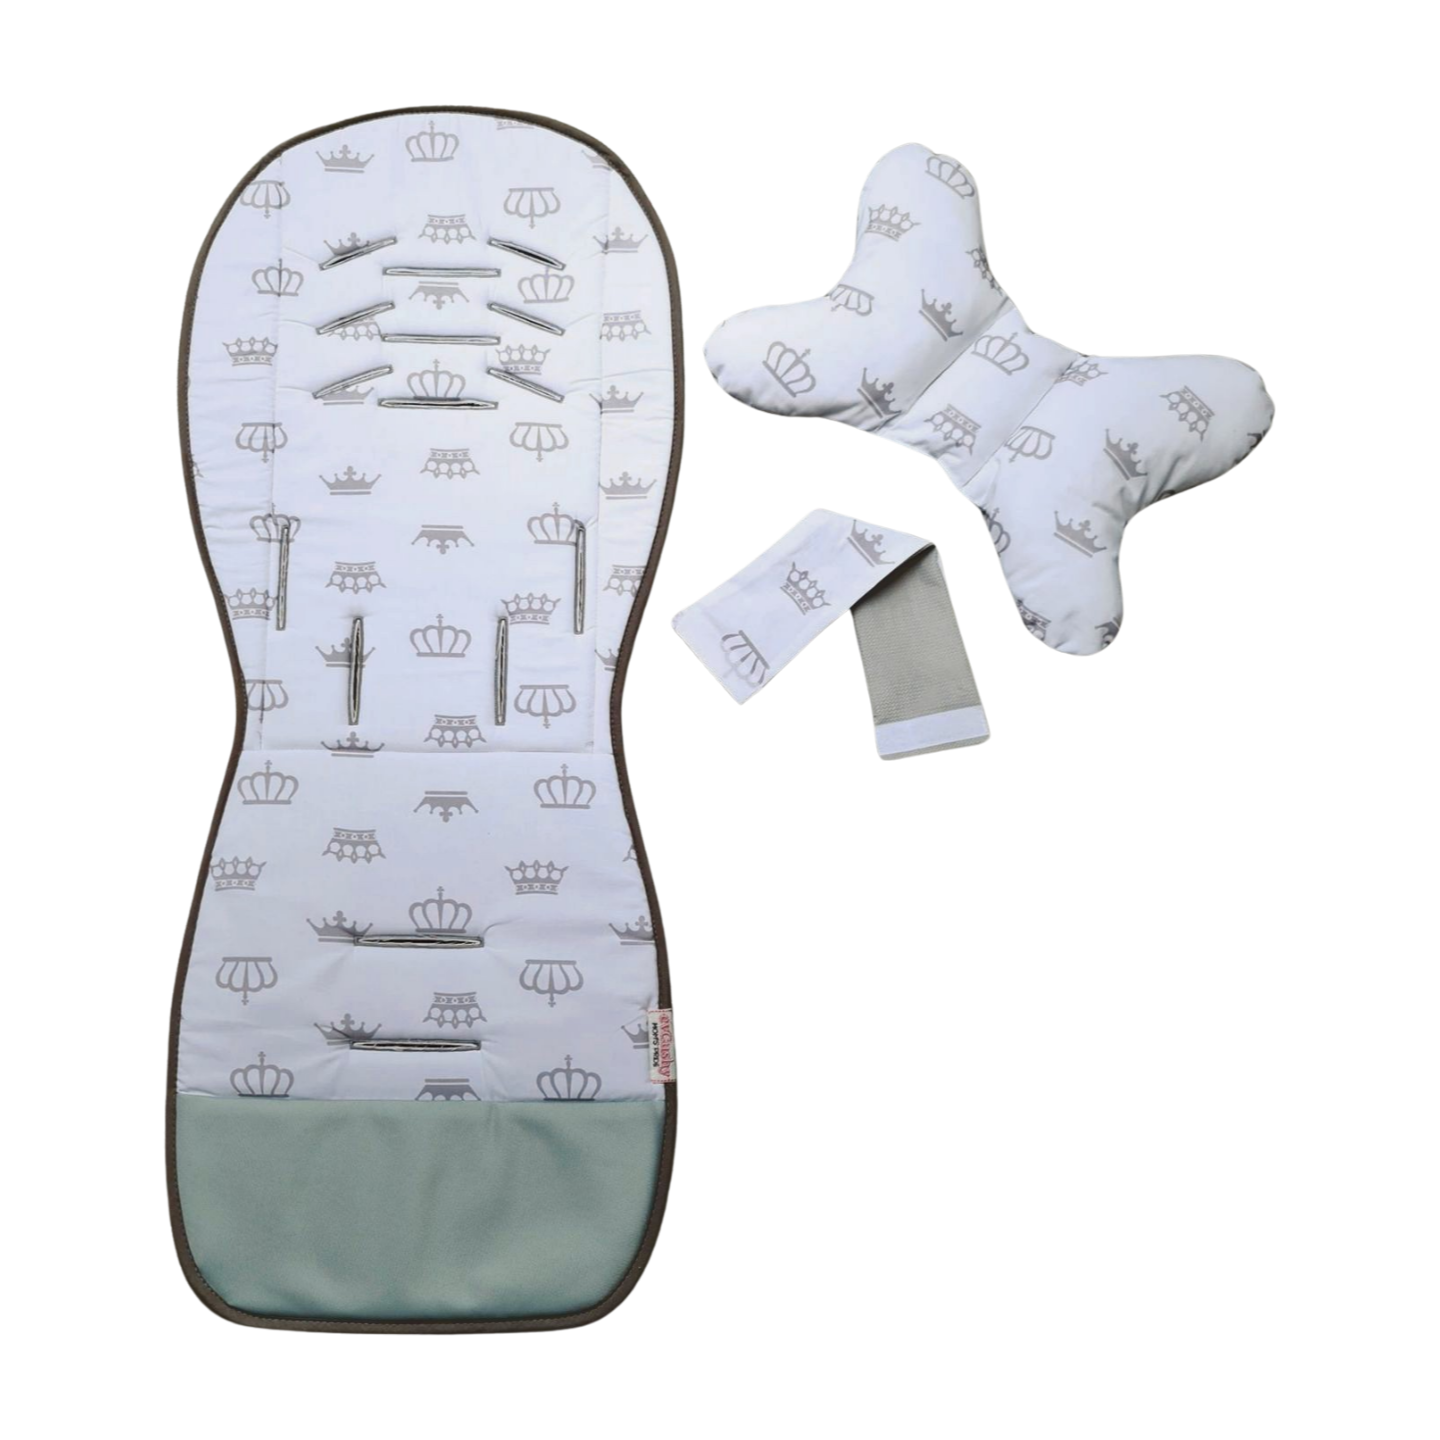 padded liner insert for strollers and pushchairs with detachable head support pillow made of velvet and cotton grey white witg crowns pattern